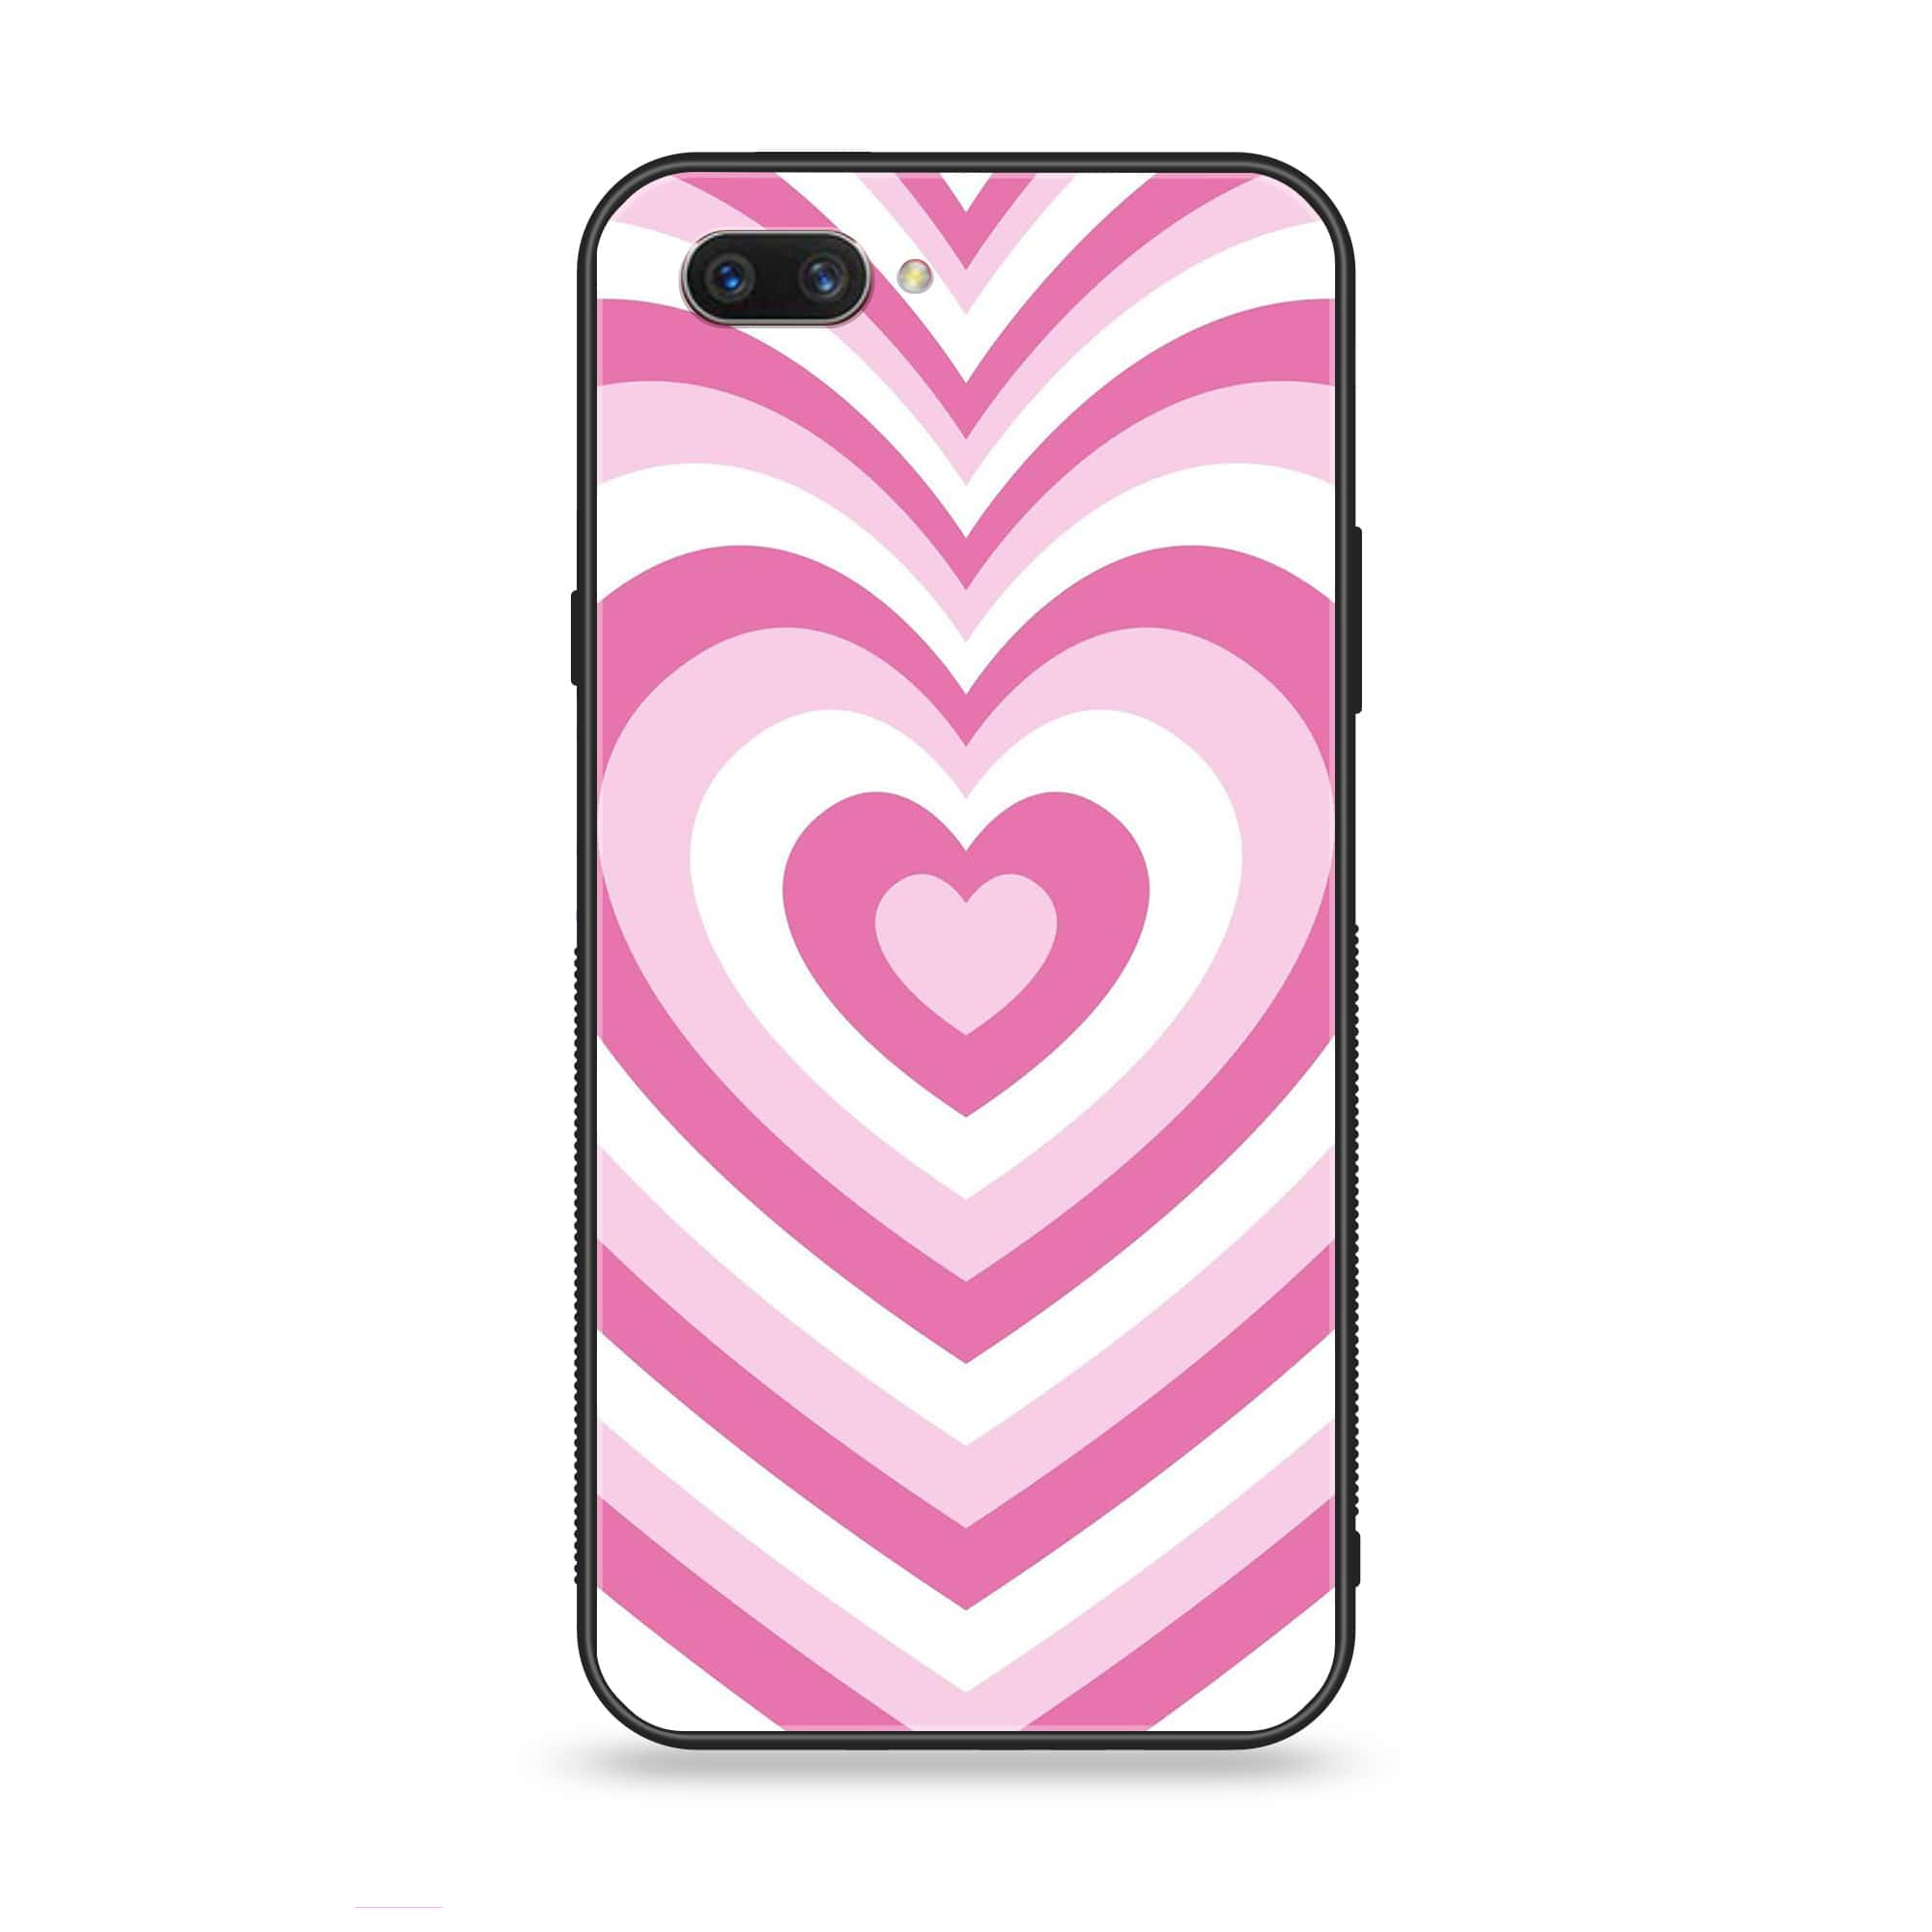 Oppo A3s - Heart Beat Series - Premium Printed Glass soft Bumper shock Proof Case